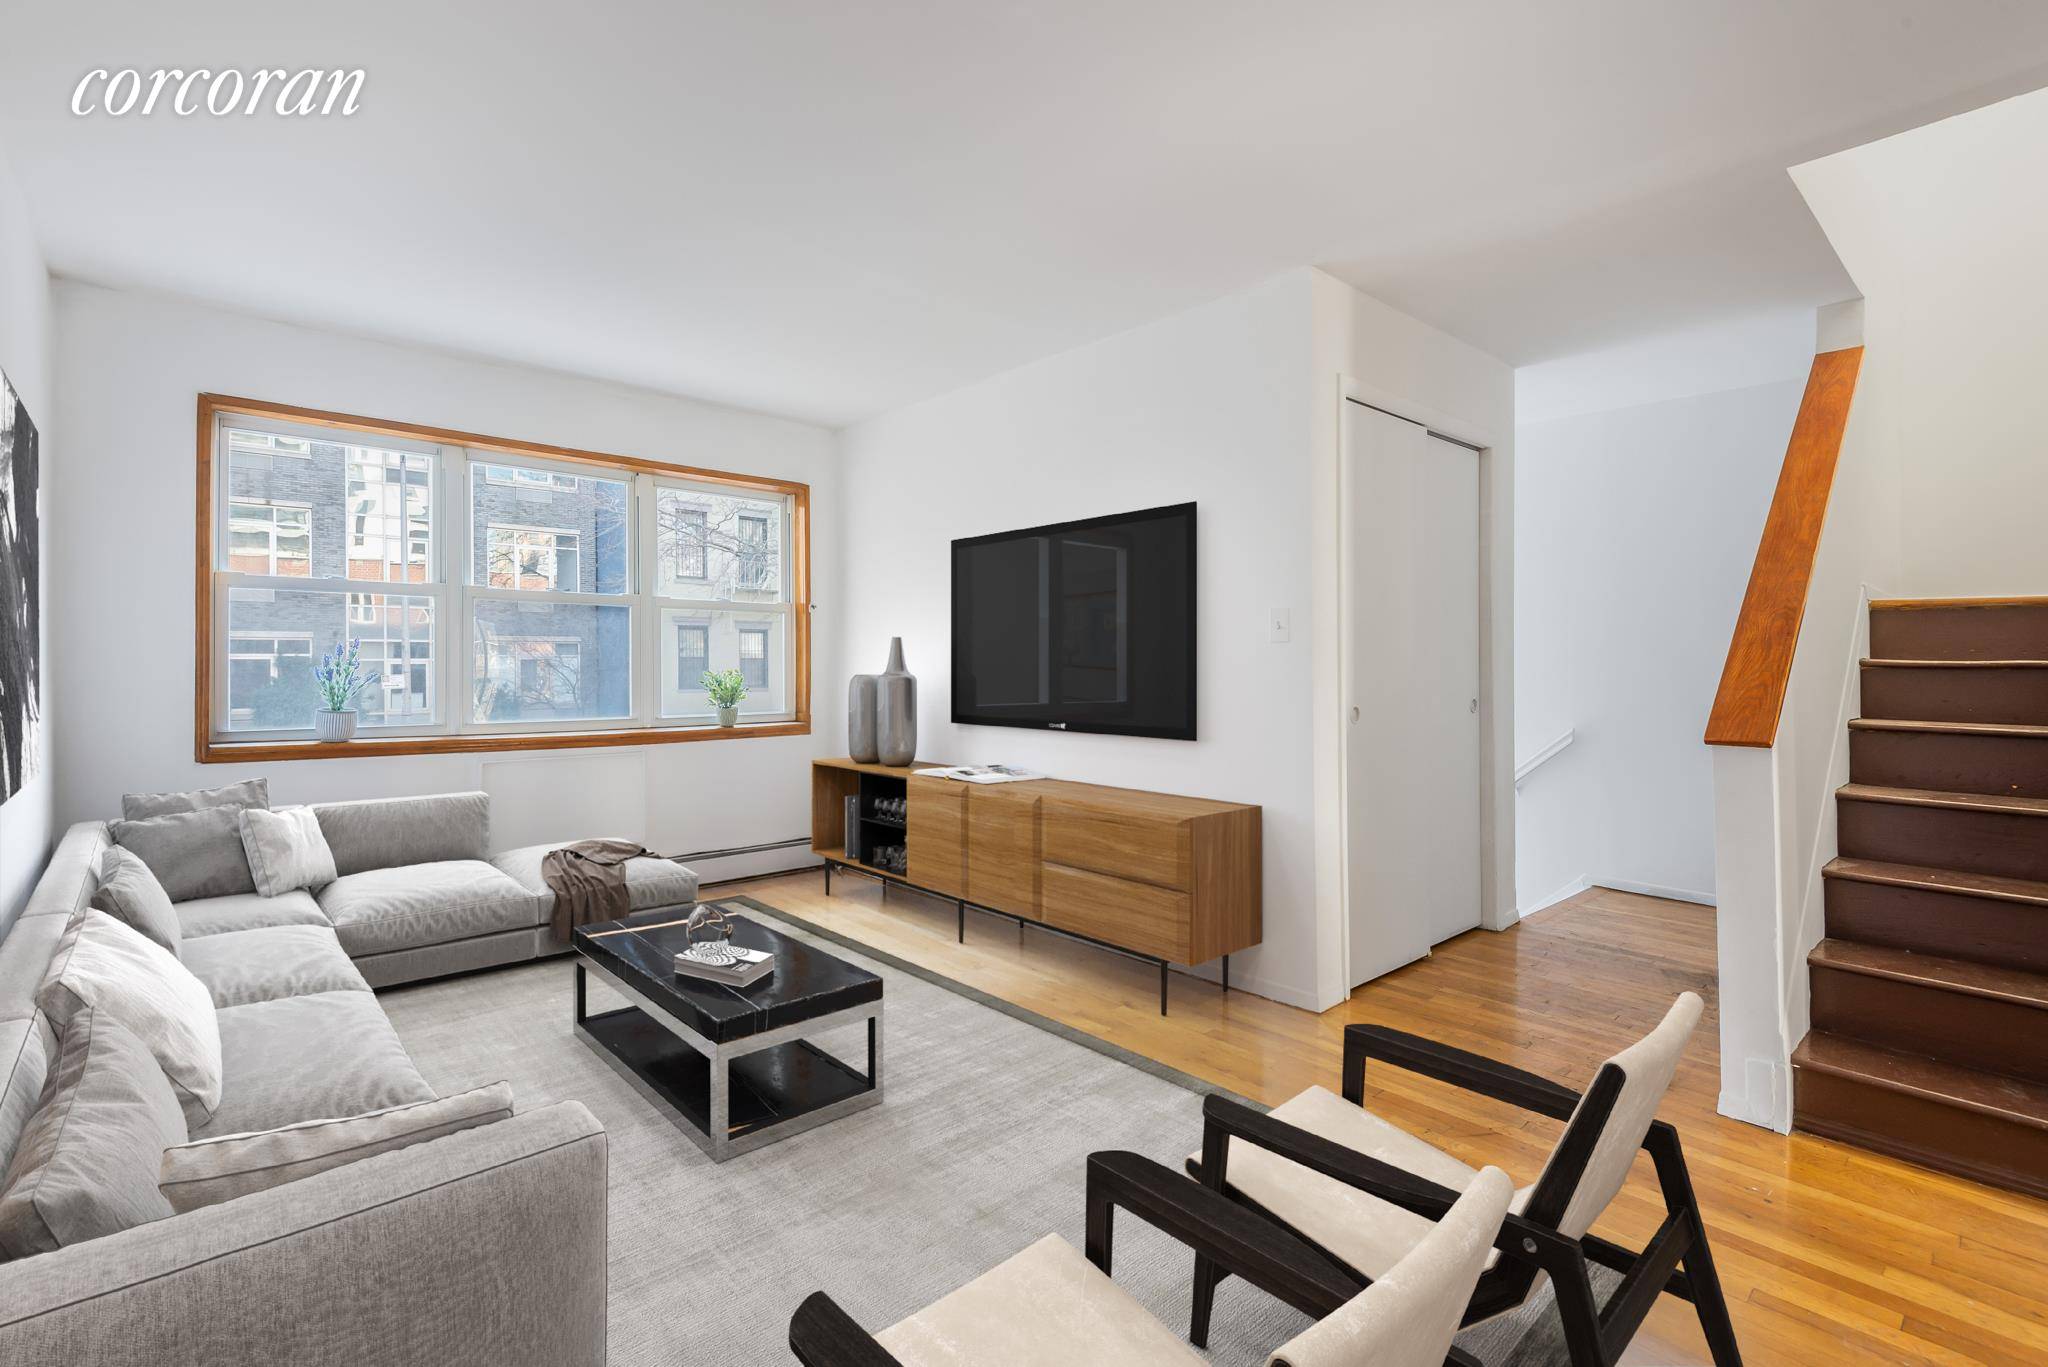 71 S. 4th Street offers the perfect opportunity for a buyer who is seeking to add their own personal touches without undergoing a major renovation.